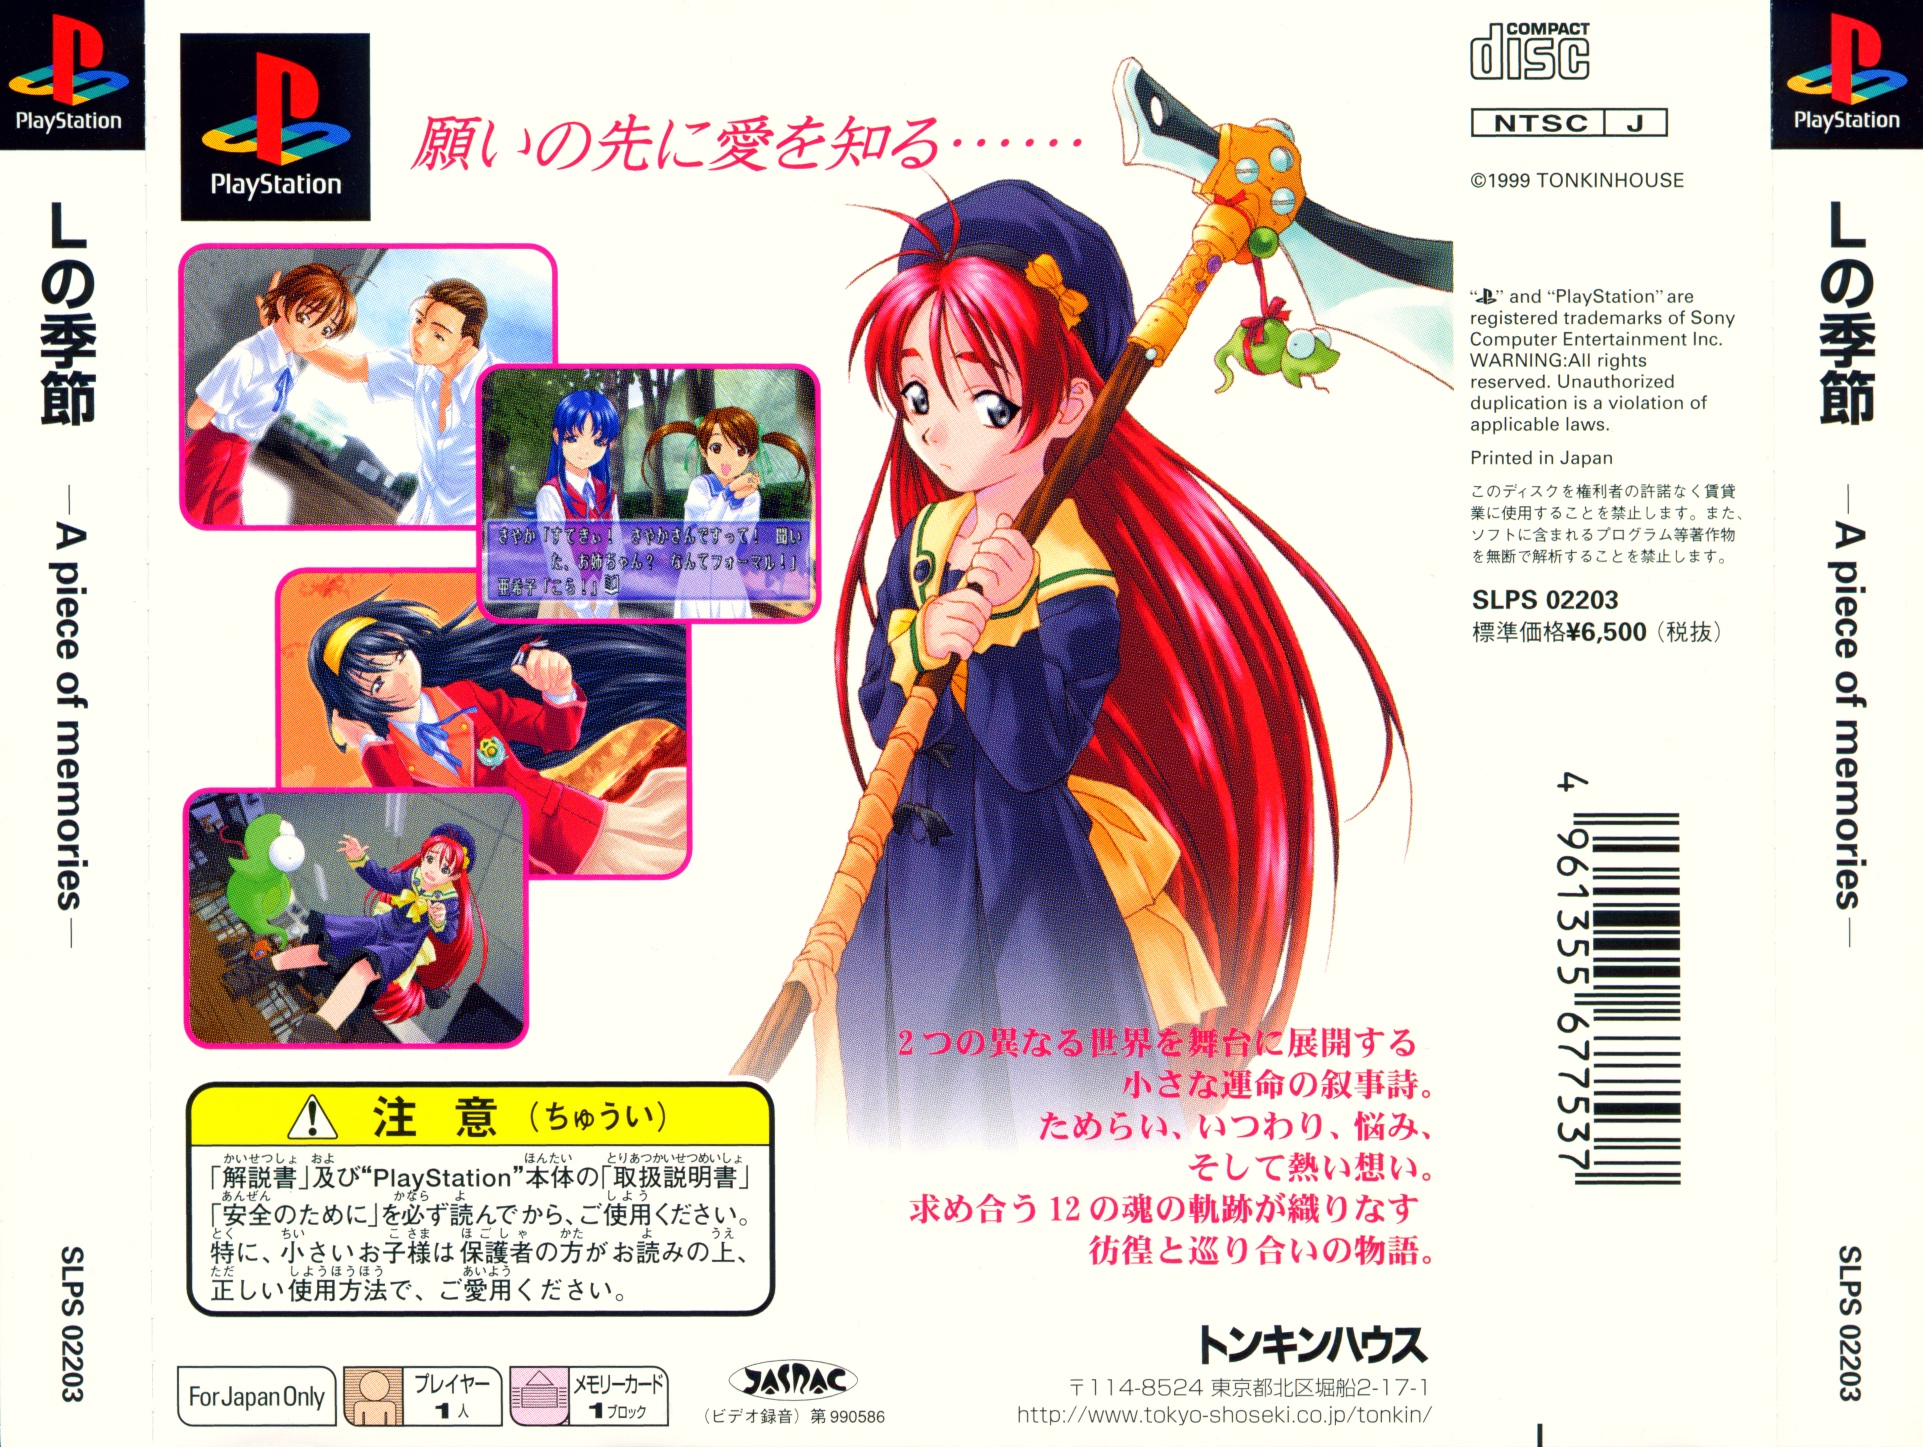 L No Kisetsu - A Piece of Memories [Limited Edition] PSX cover